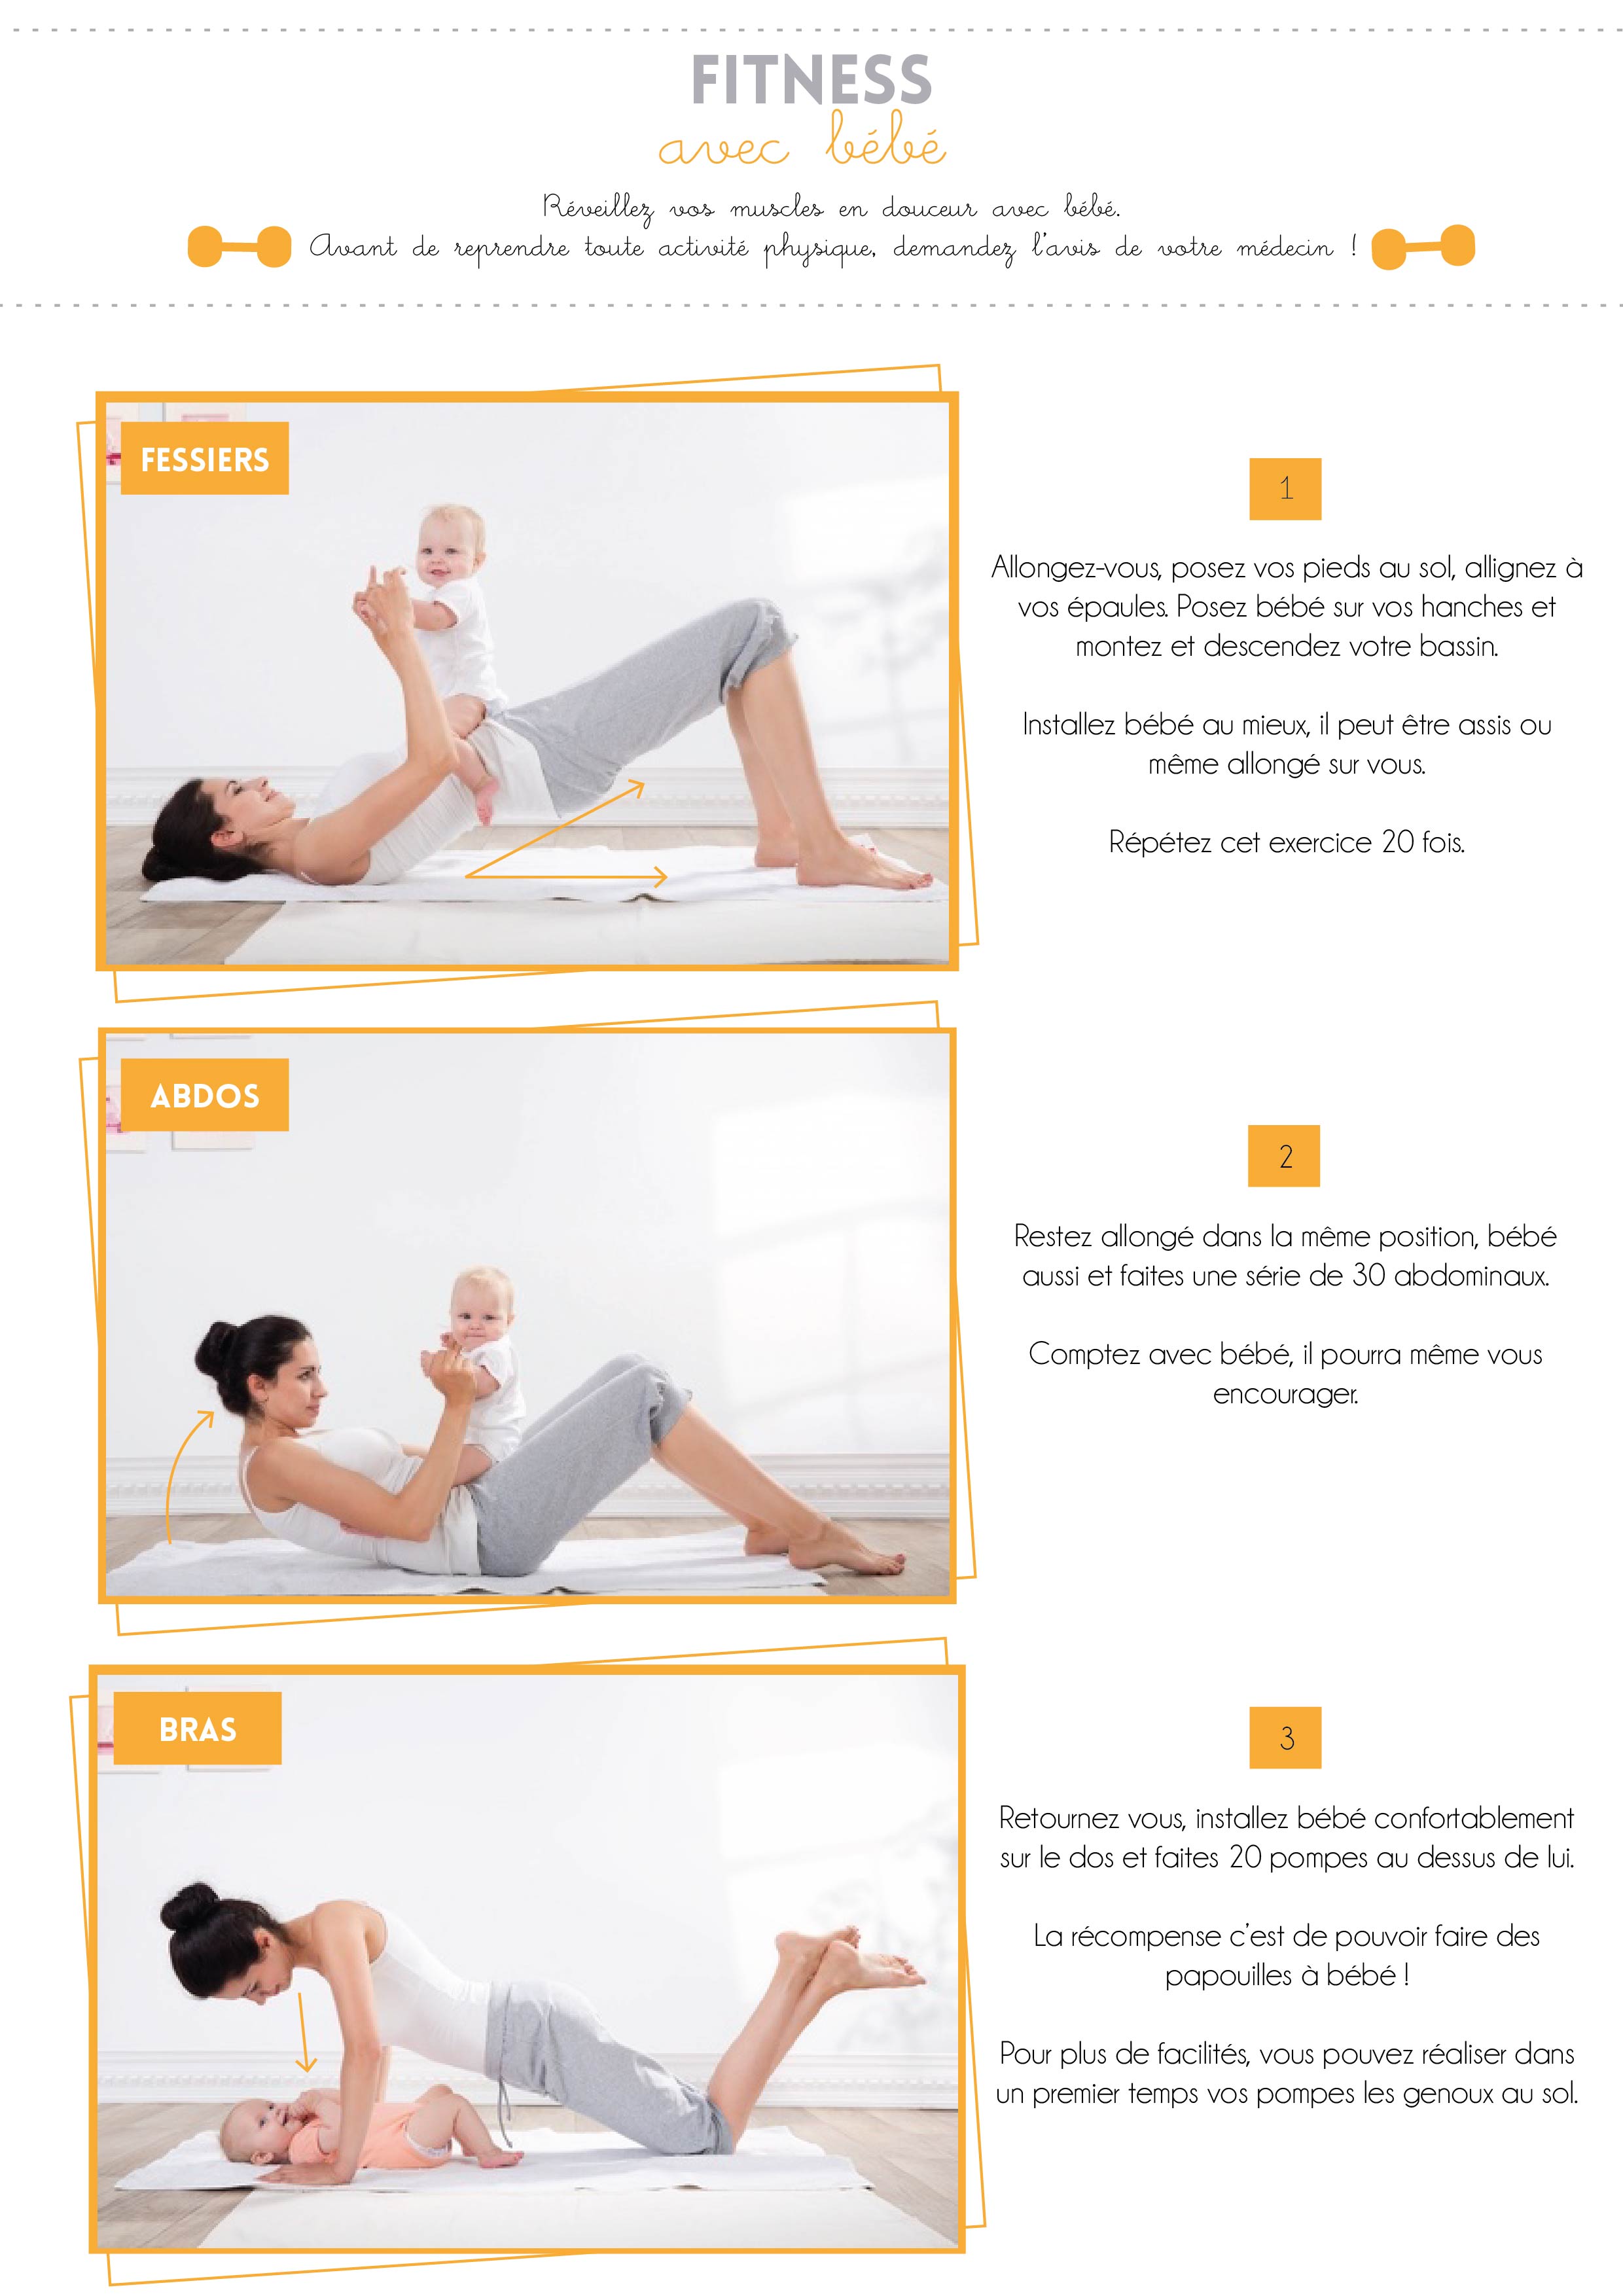 6 exercices-fitness avec bb